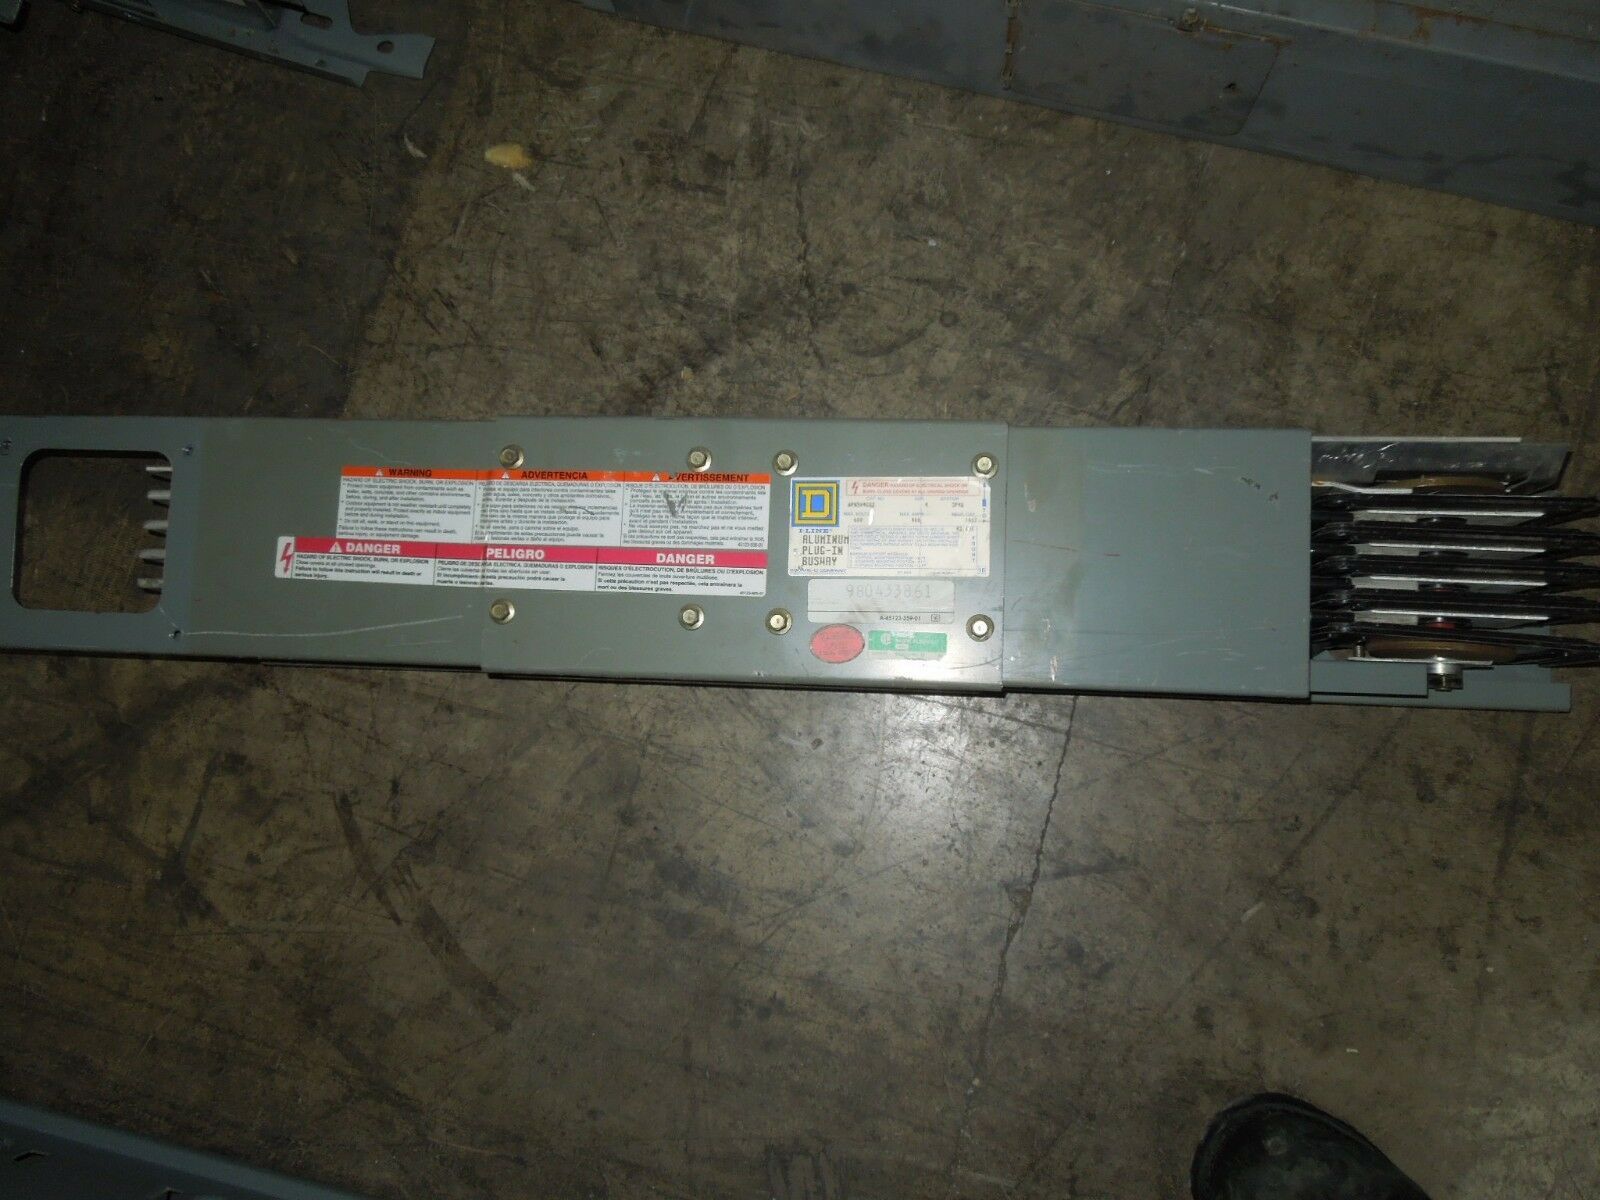 Square D I-Line APH504G32 32" Aluminum Plug-In Busway 400A 3ph 4W 600V Used - $150.00